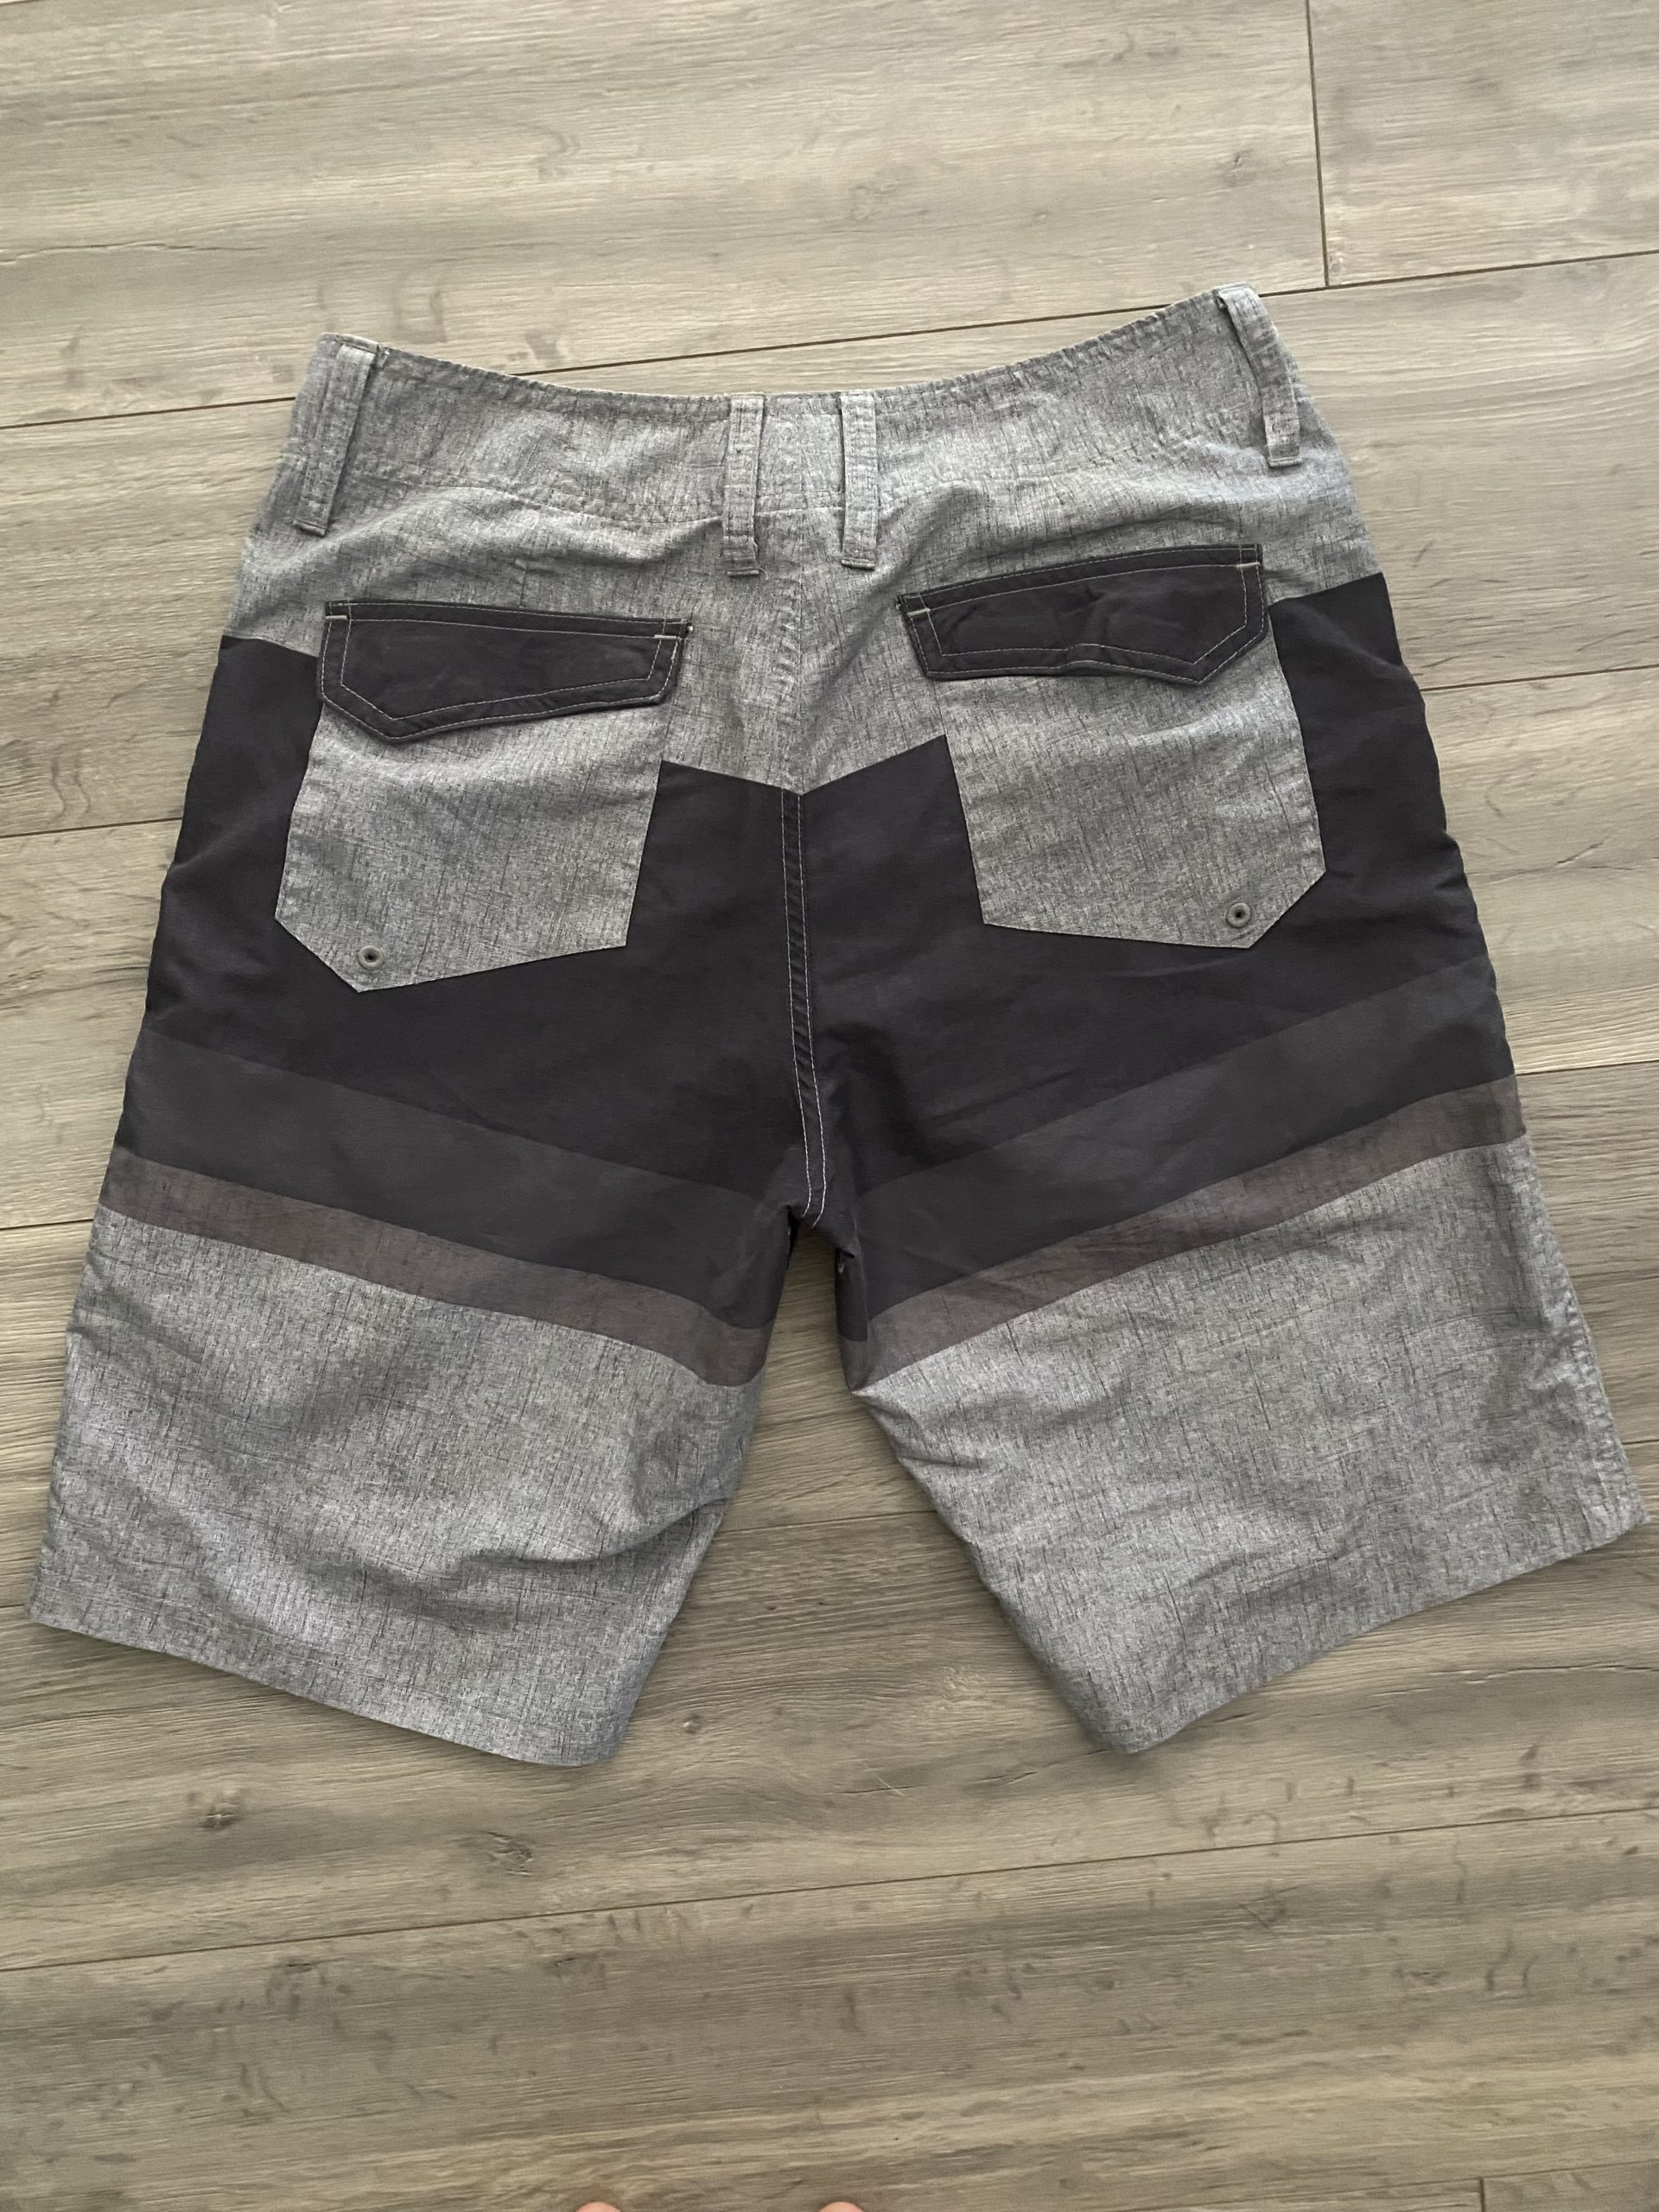 Oakley Mens Grey Board Shorts Size 30 ⋆ Twice as Nice Consignment Boutique